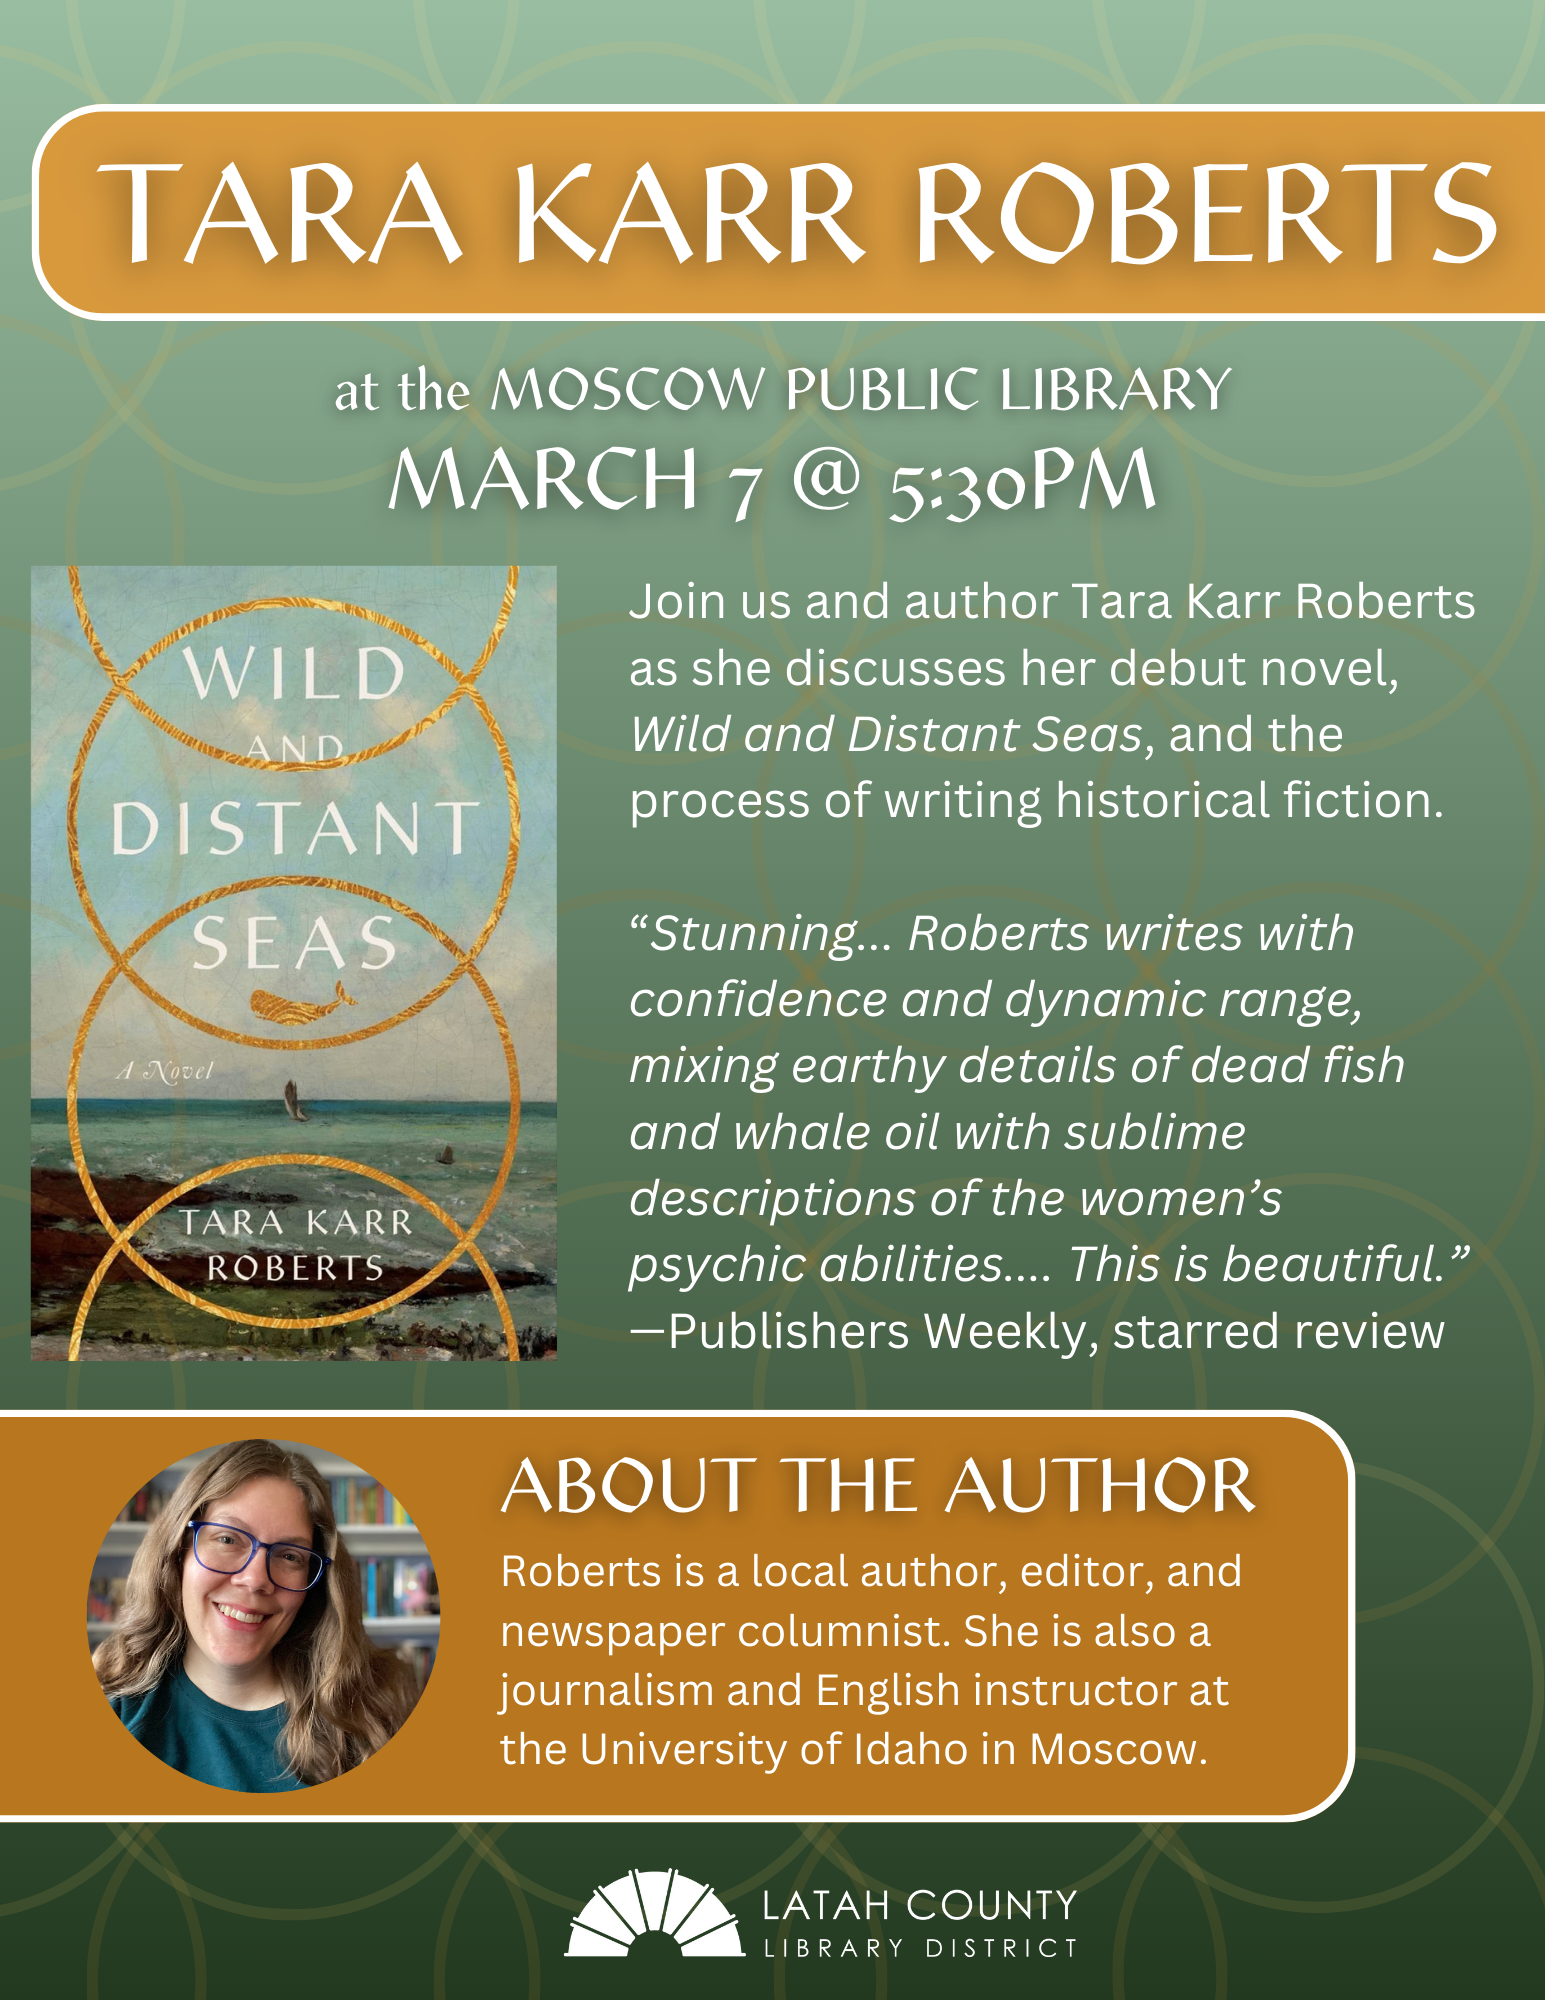 Tara Karr Roberts - Author Event at the Moscow Public Library